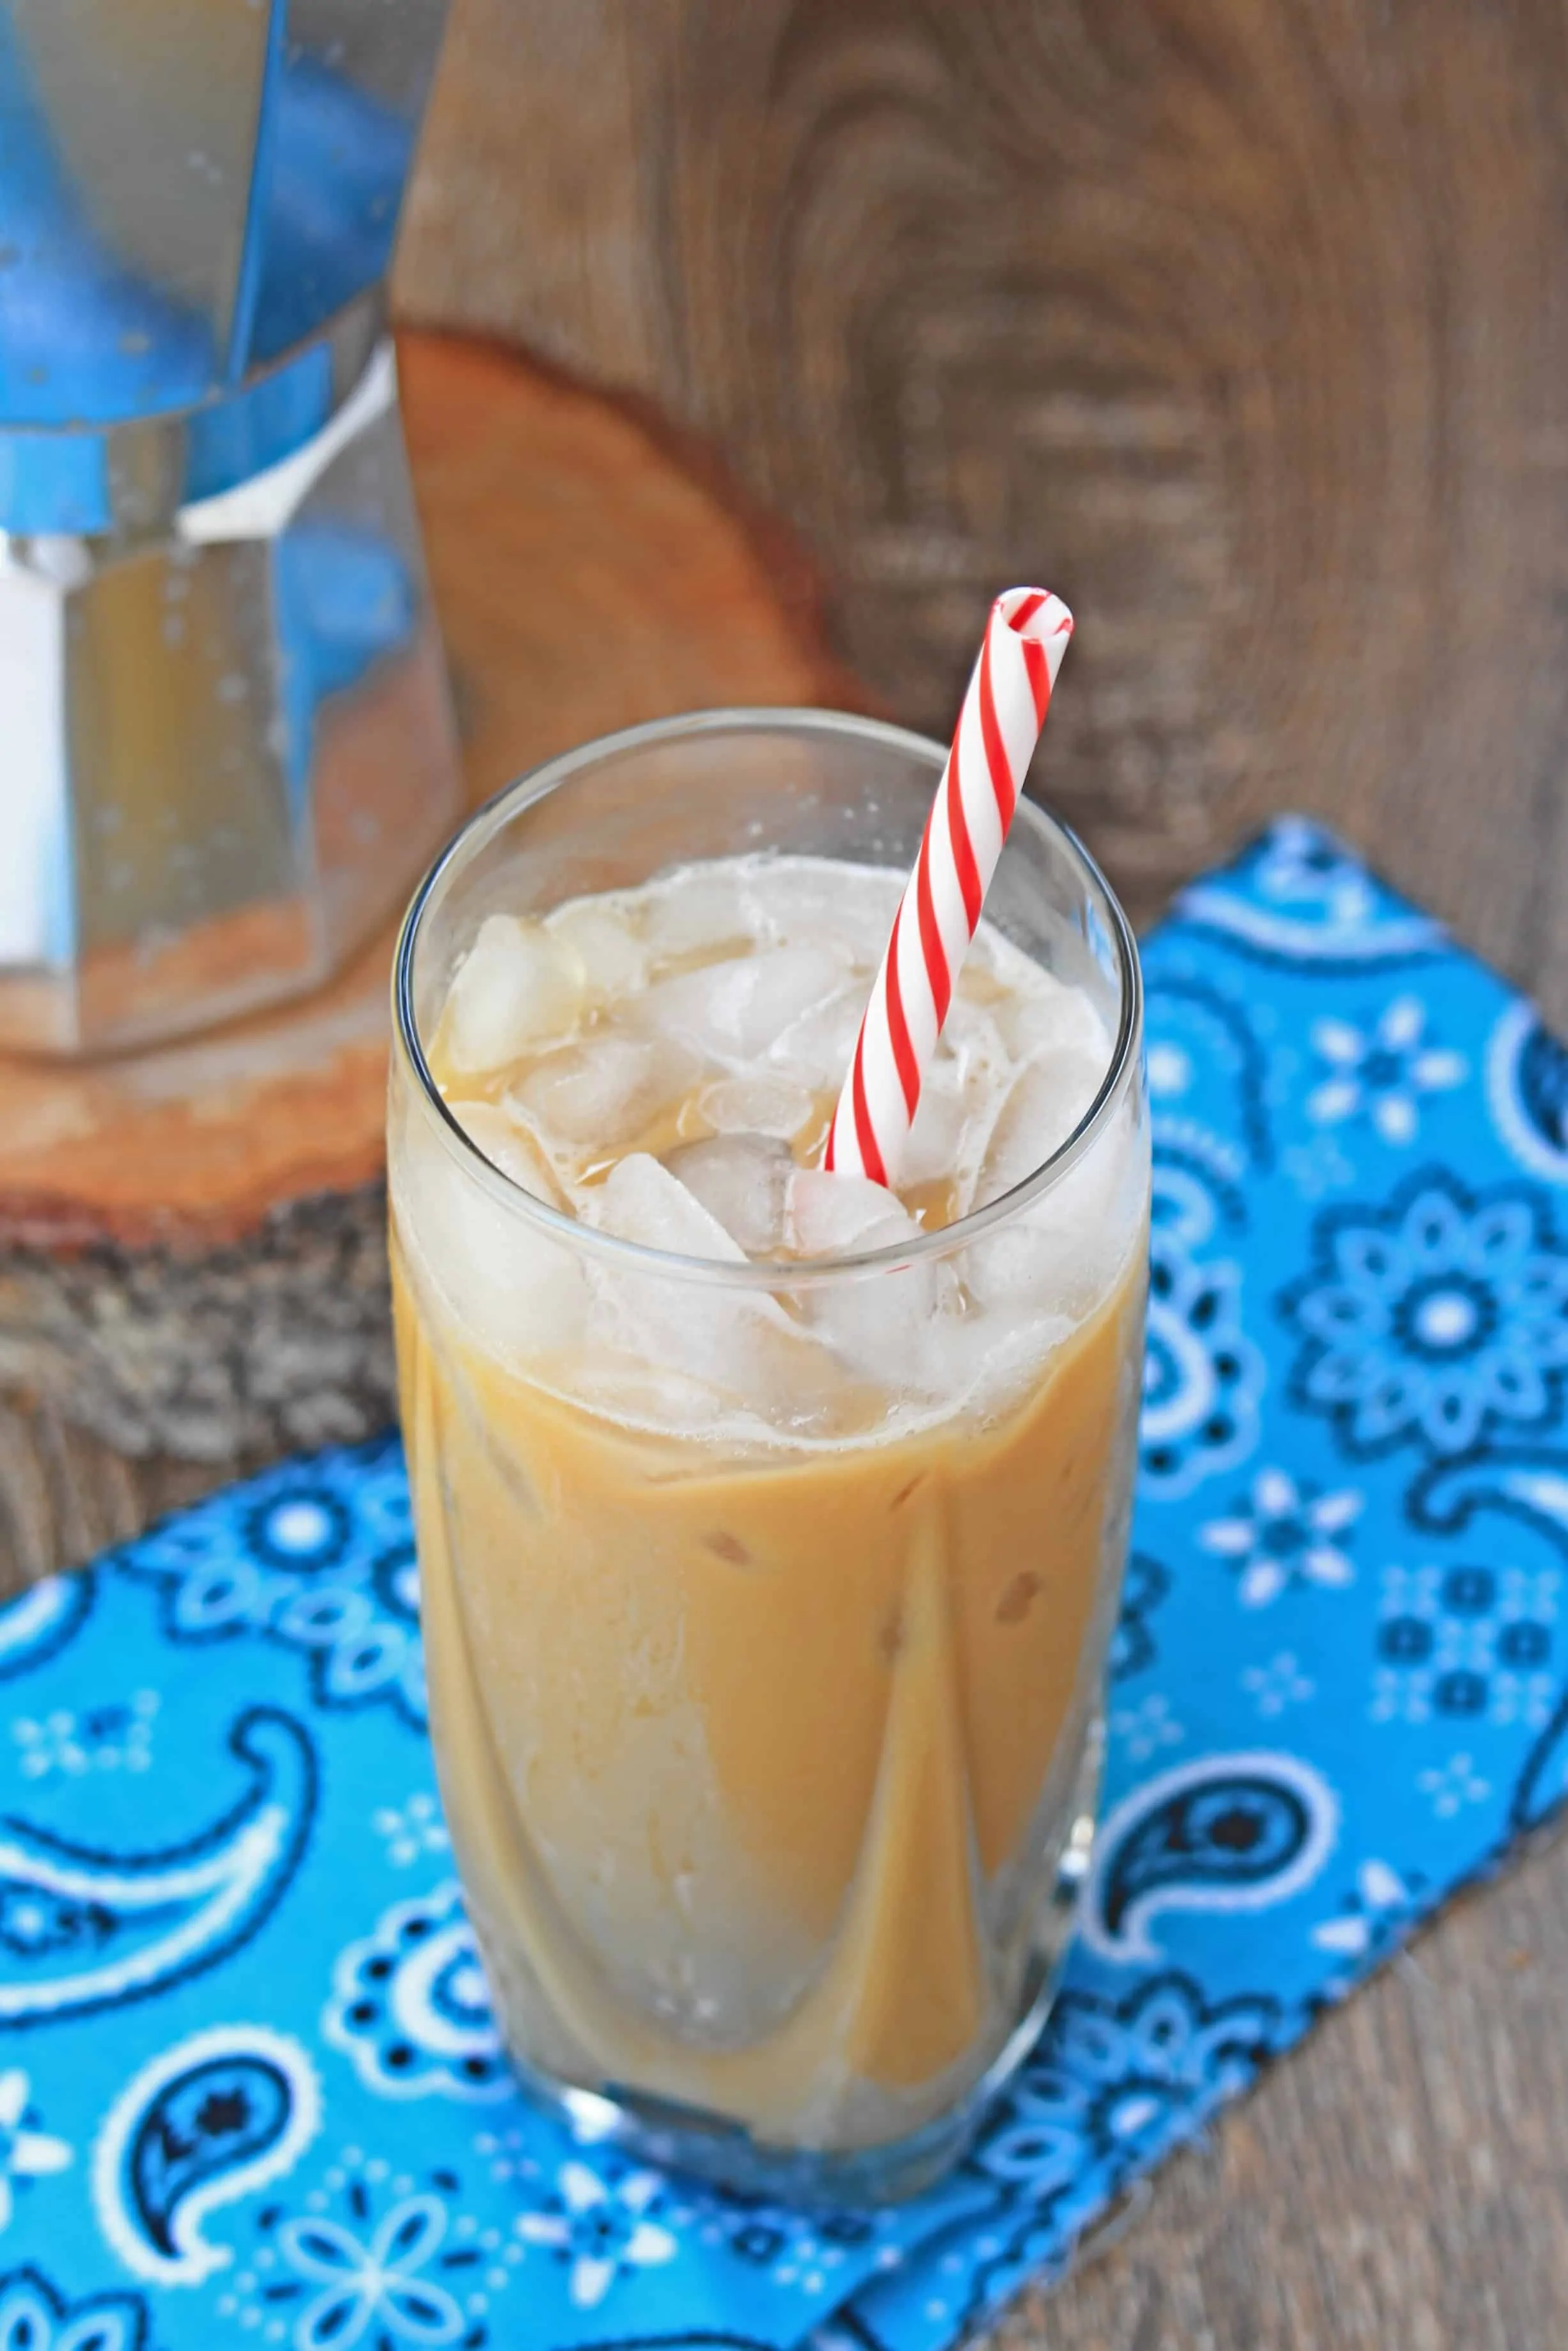 Ca Phe Sua Da in a tall glass with ice and straw